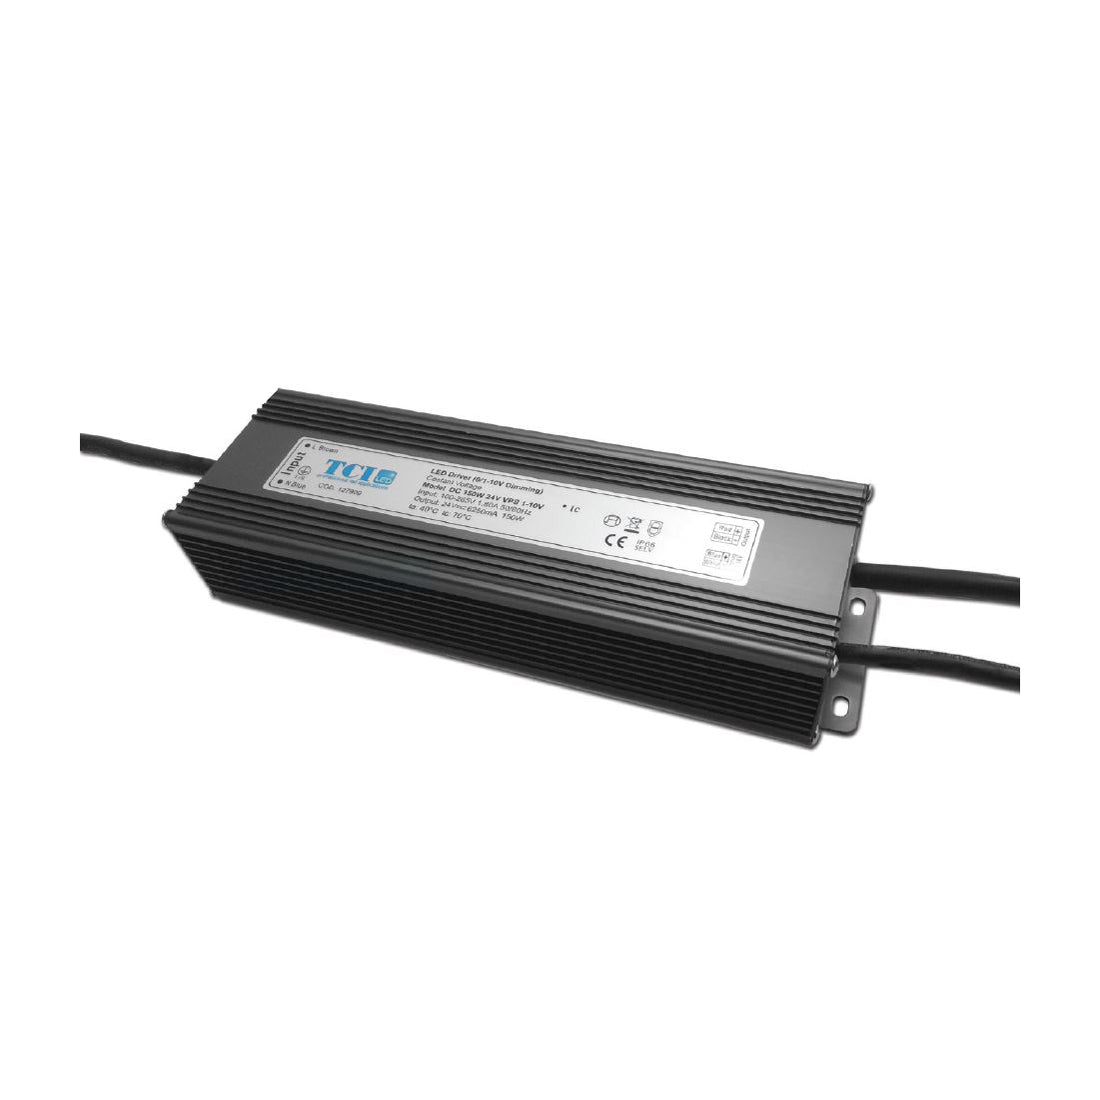 TCI 150W 24V constant voltage driver - 1-10V dimmable(127909)